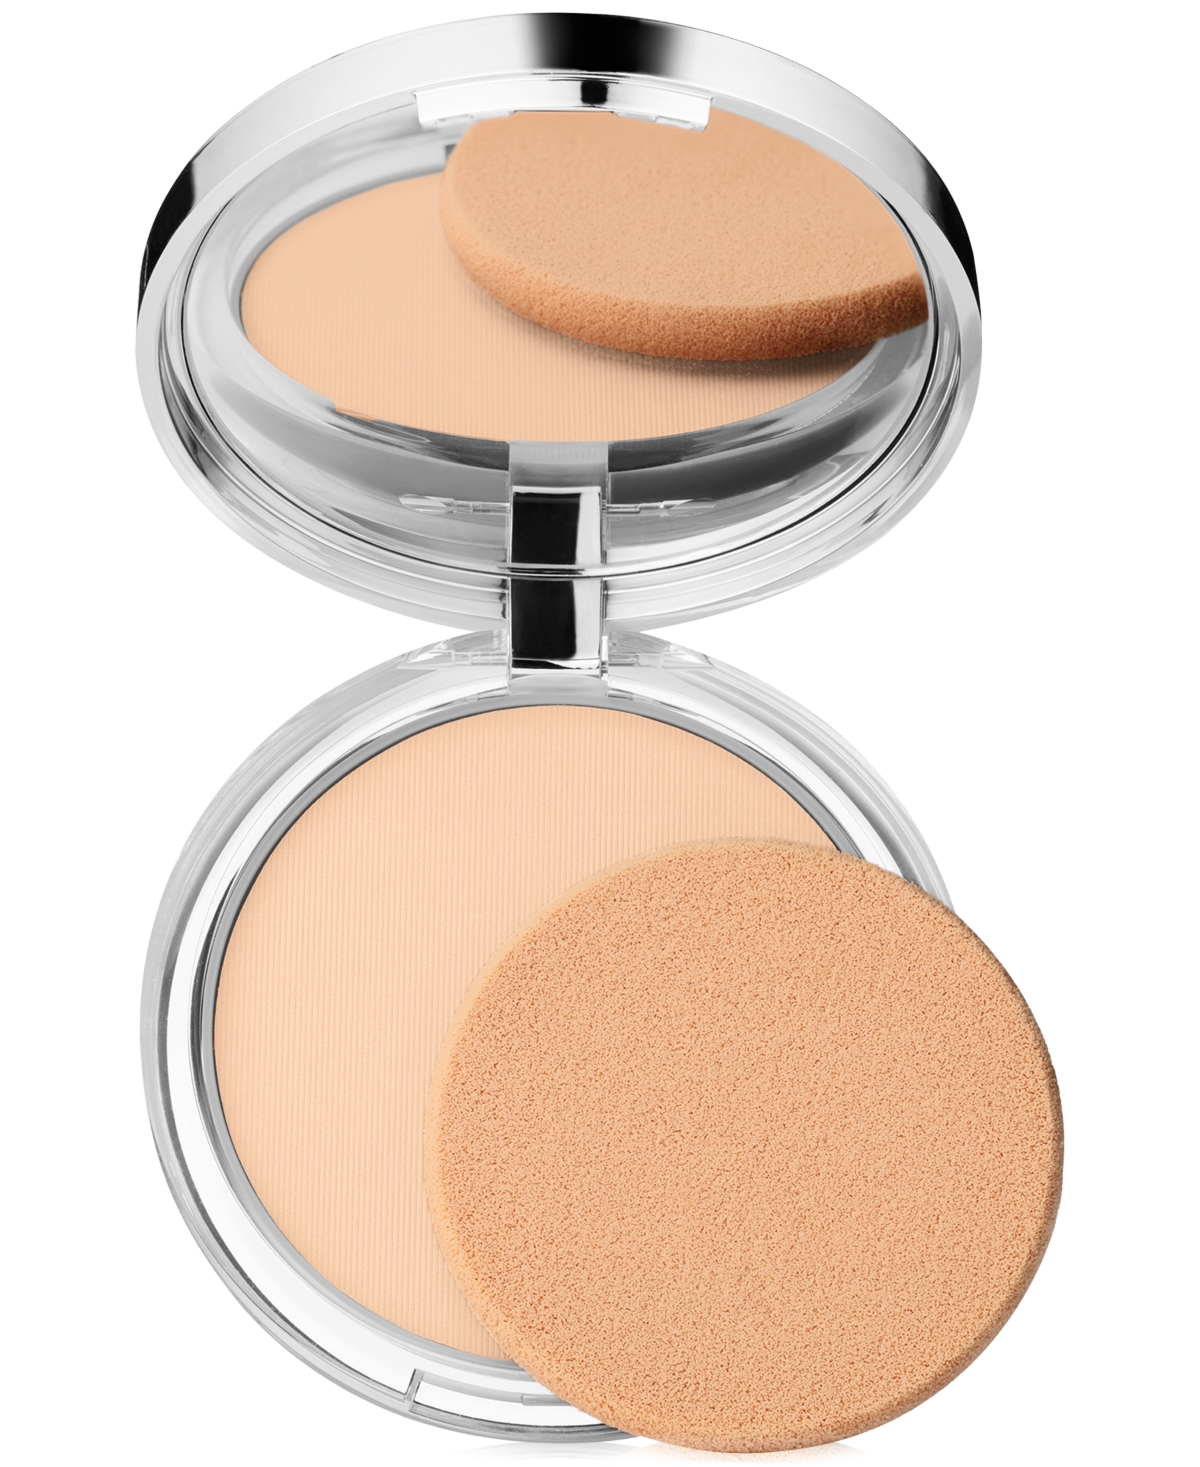 Clinique Stay-Matte Sheer Pressed Powder, 0.27 oz. - Stay Neutral